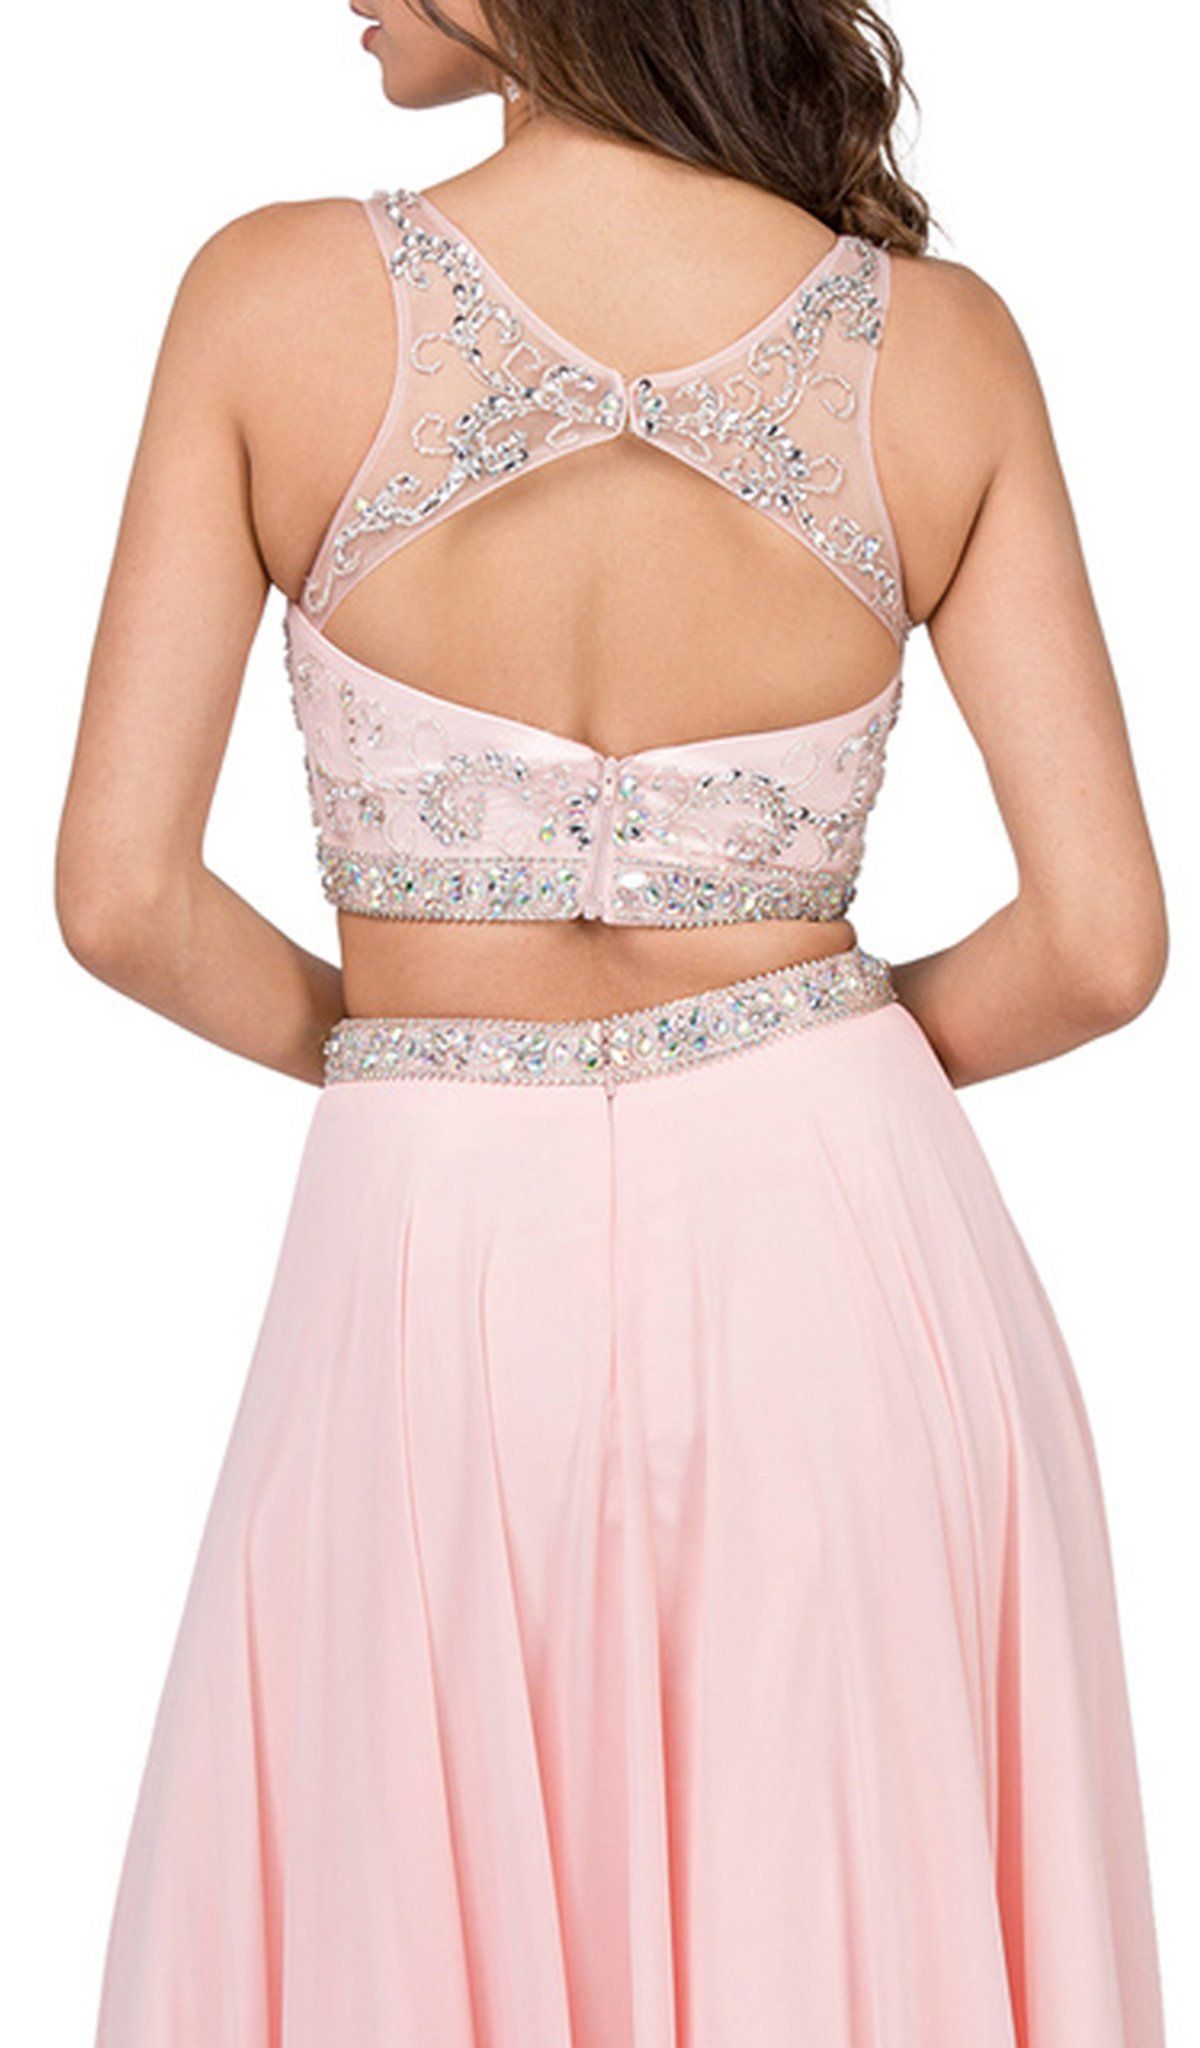 Dancing Queen - 2225 Jeweled Two Piece Illusion Neck A-line Prom Dress -   12 dress Indian jewels ideas